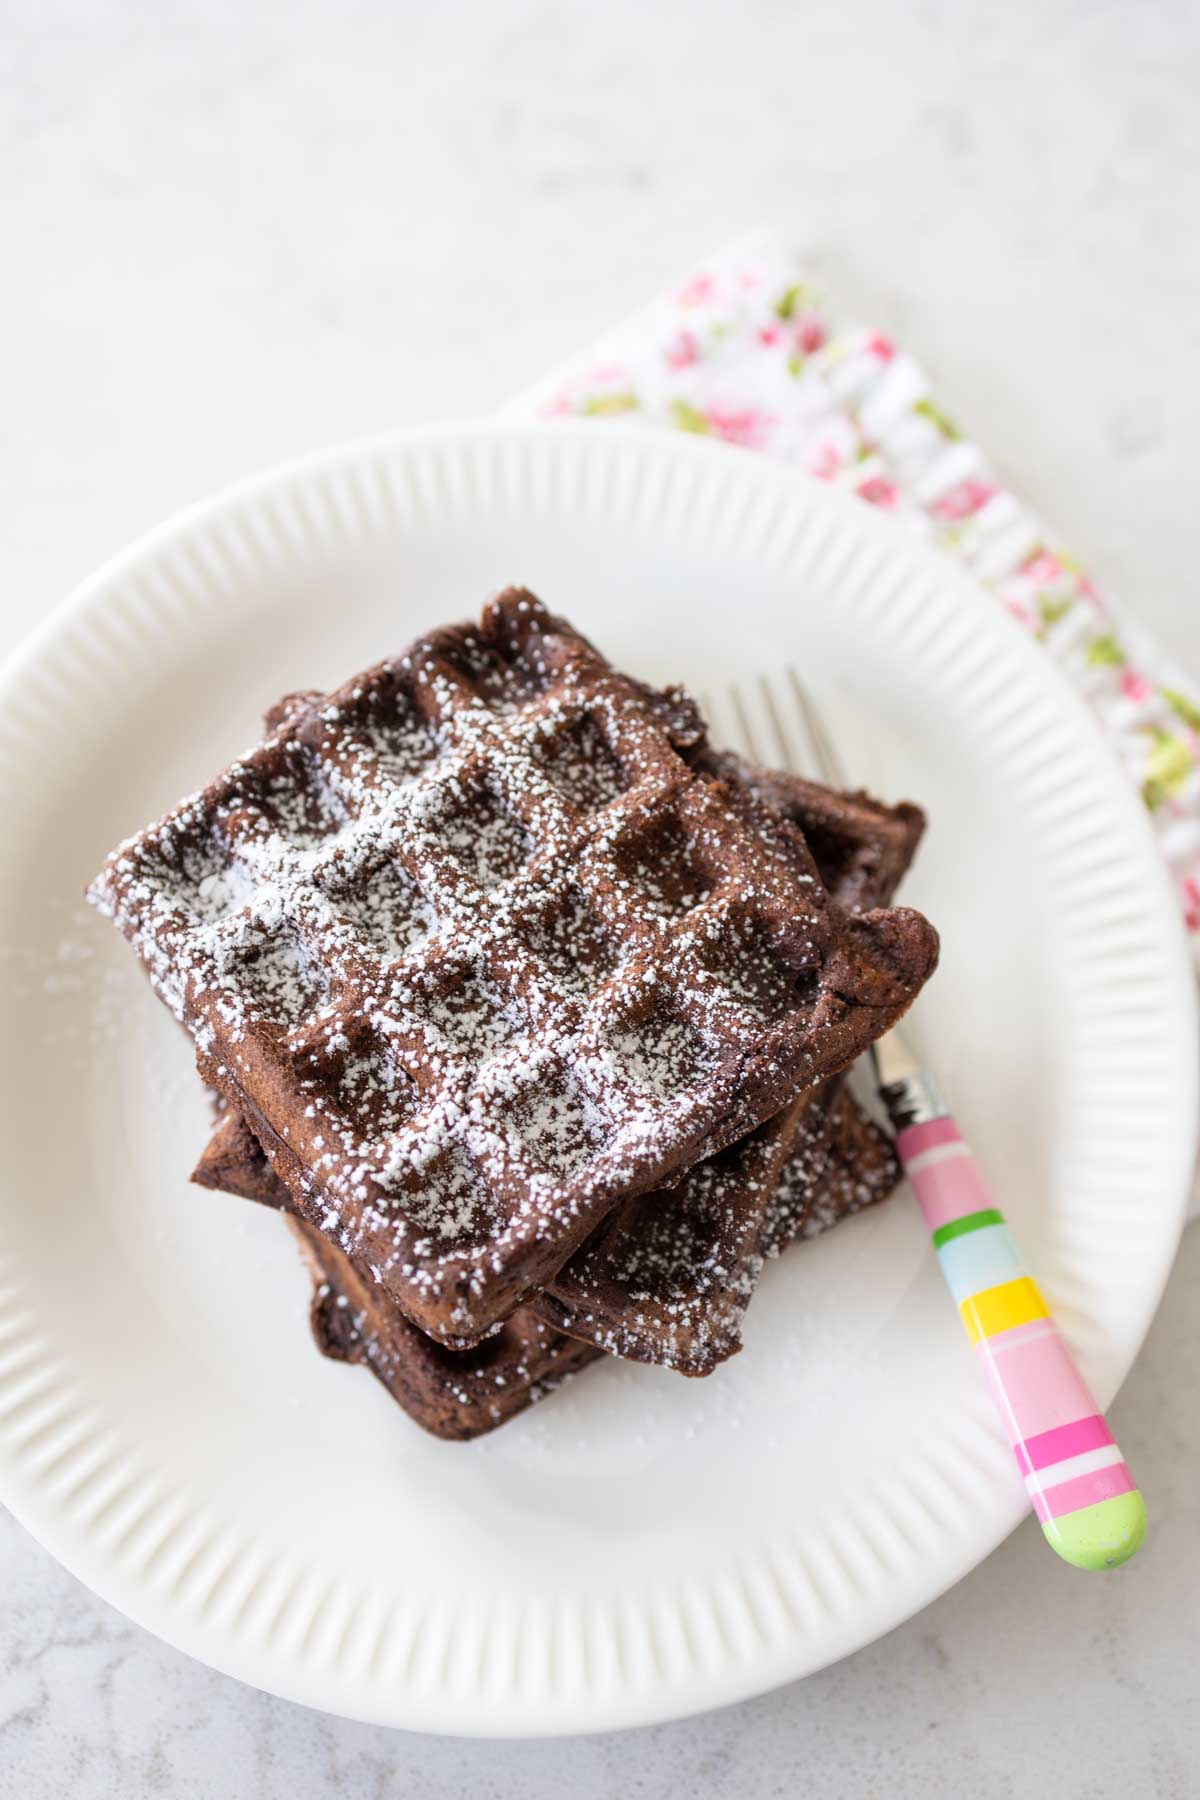 A simple dusting of powdered sugar on the chocolate waffles.